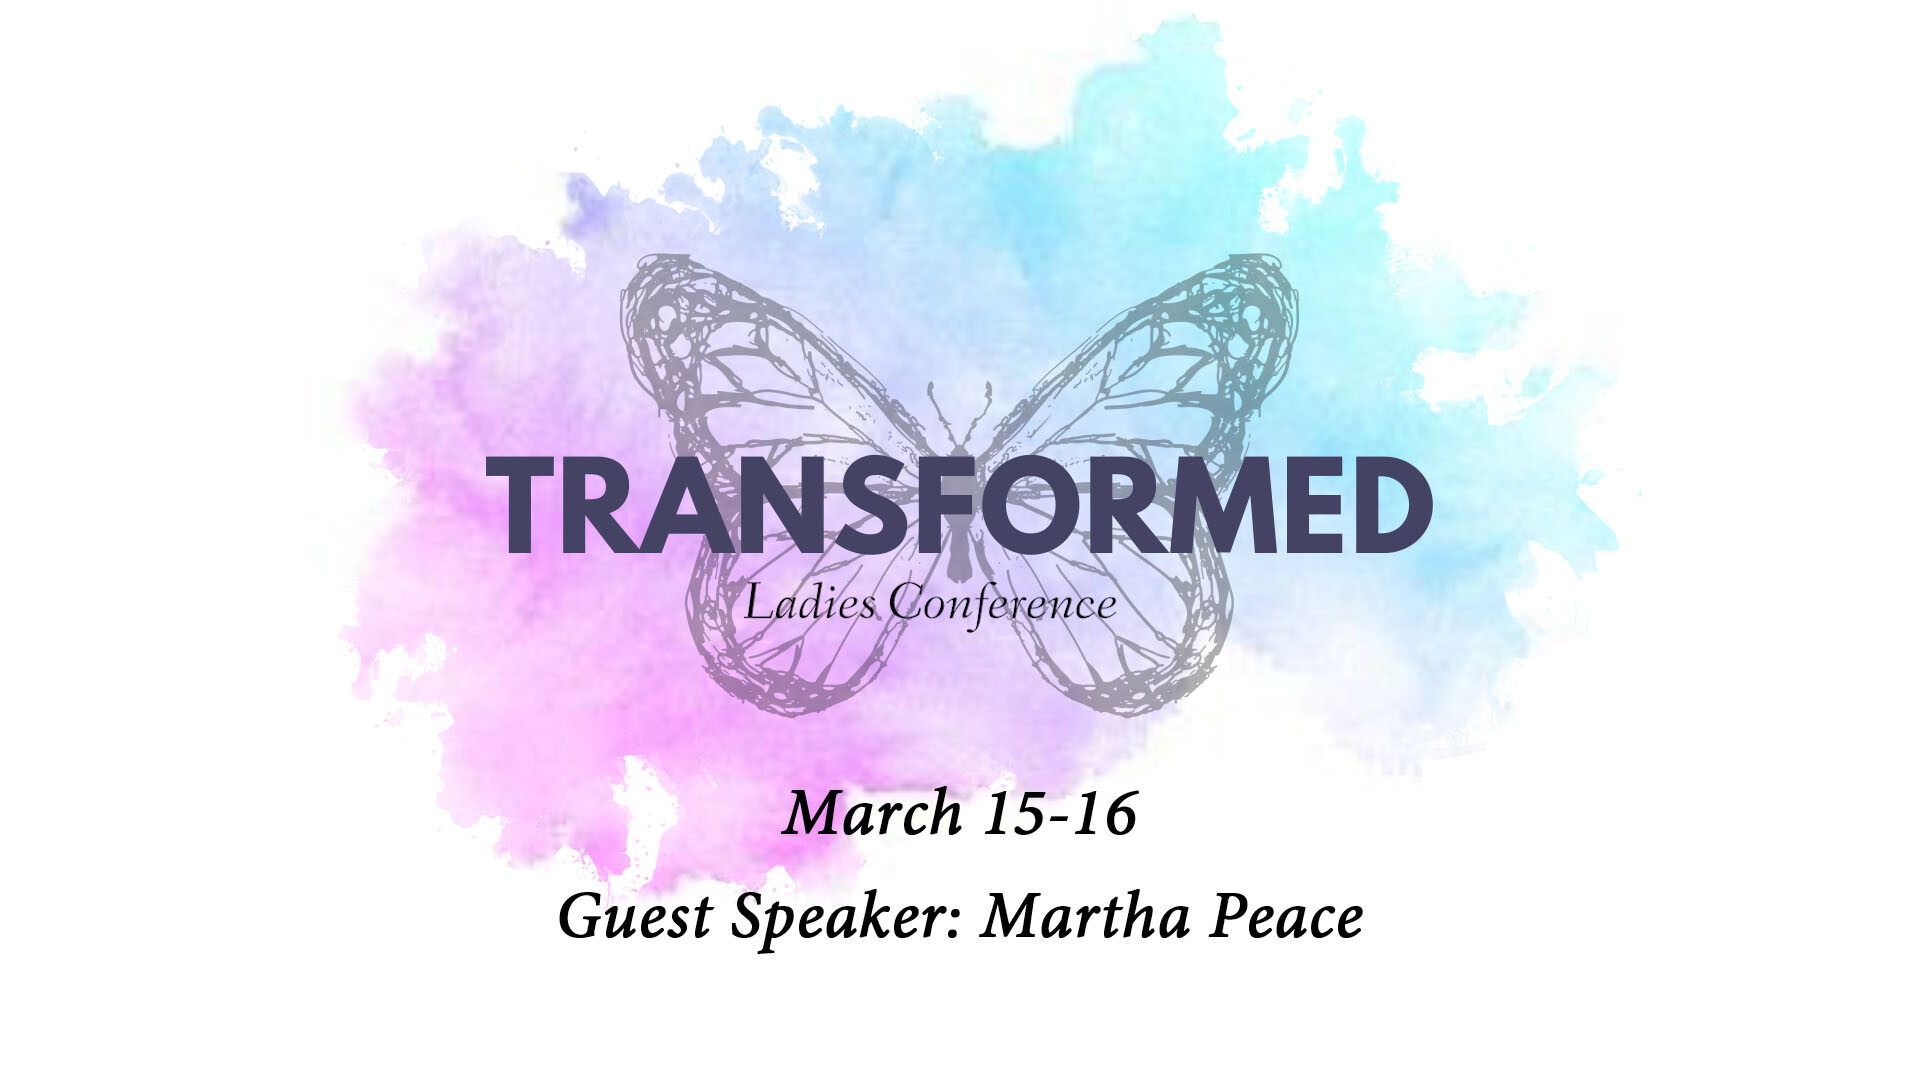 Session 1: Transformed Women's Conference